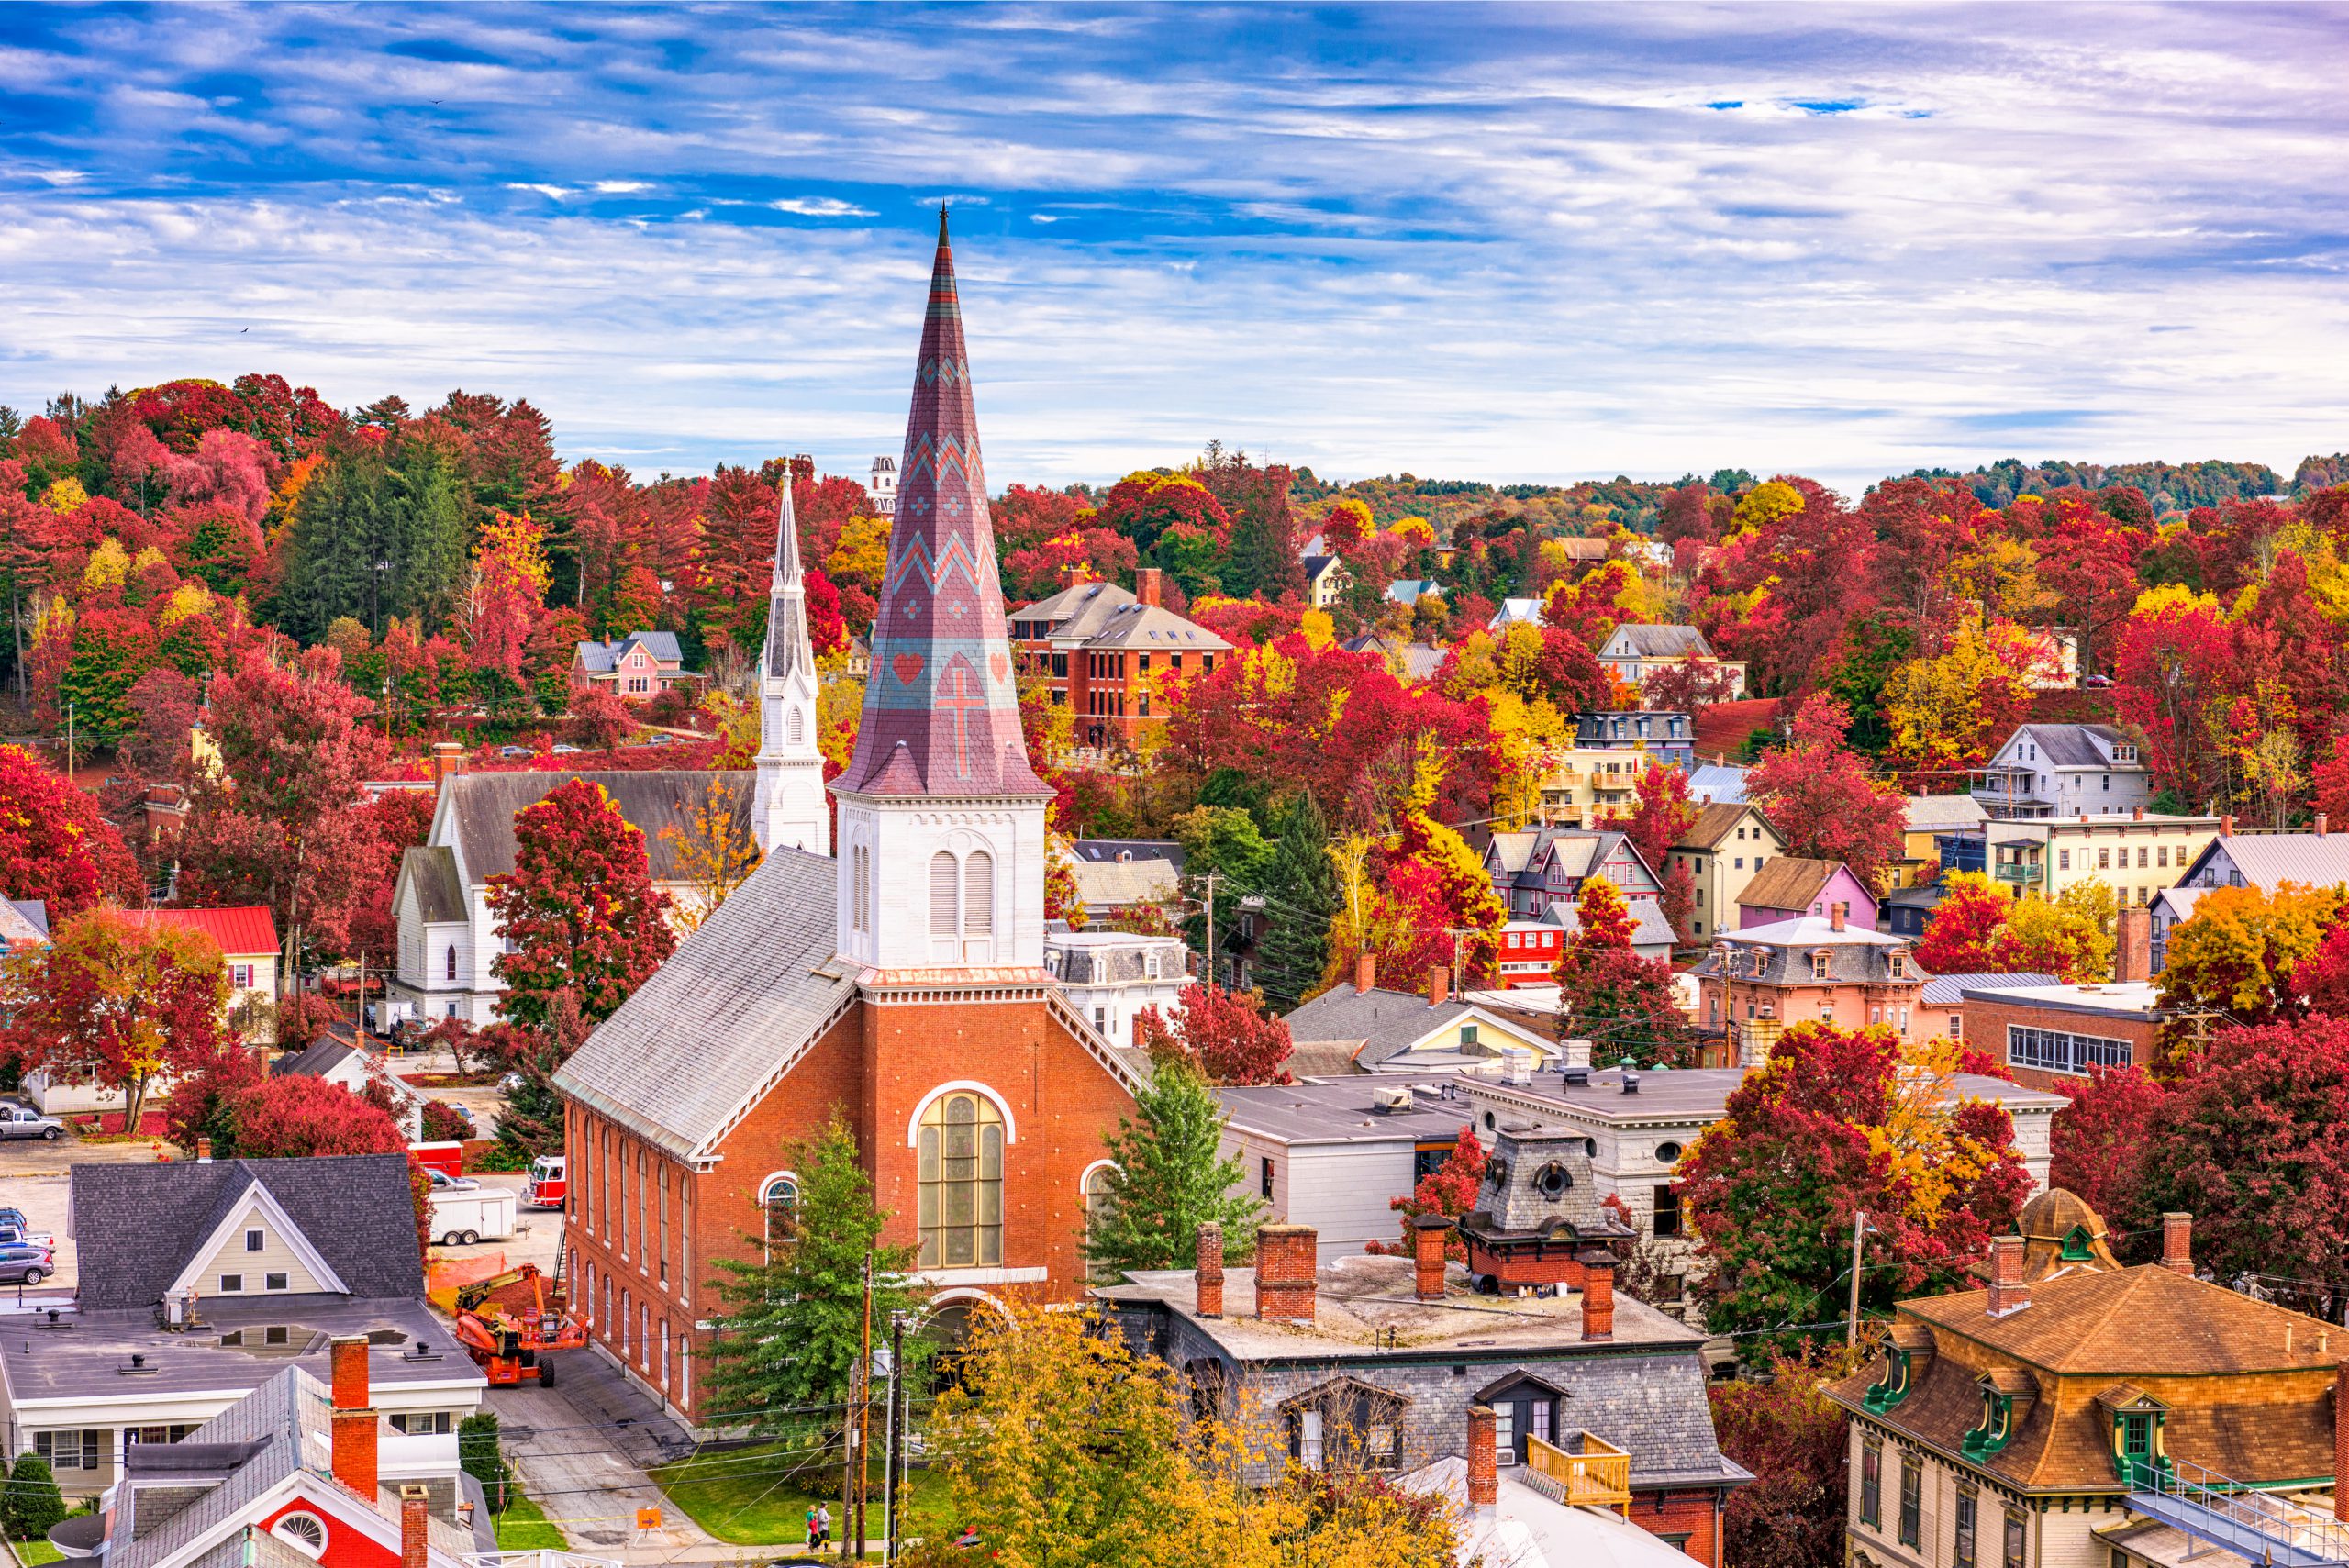 A Travel Guide For Fans Of The Gilmore Girls 12 Spectacular Small Towns That Resemble Stars